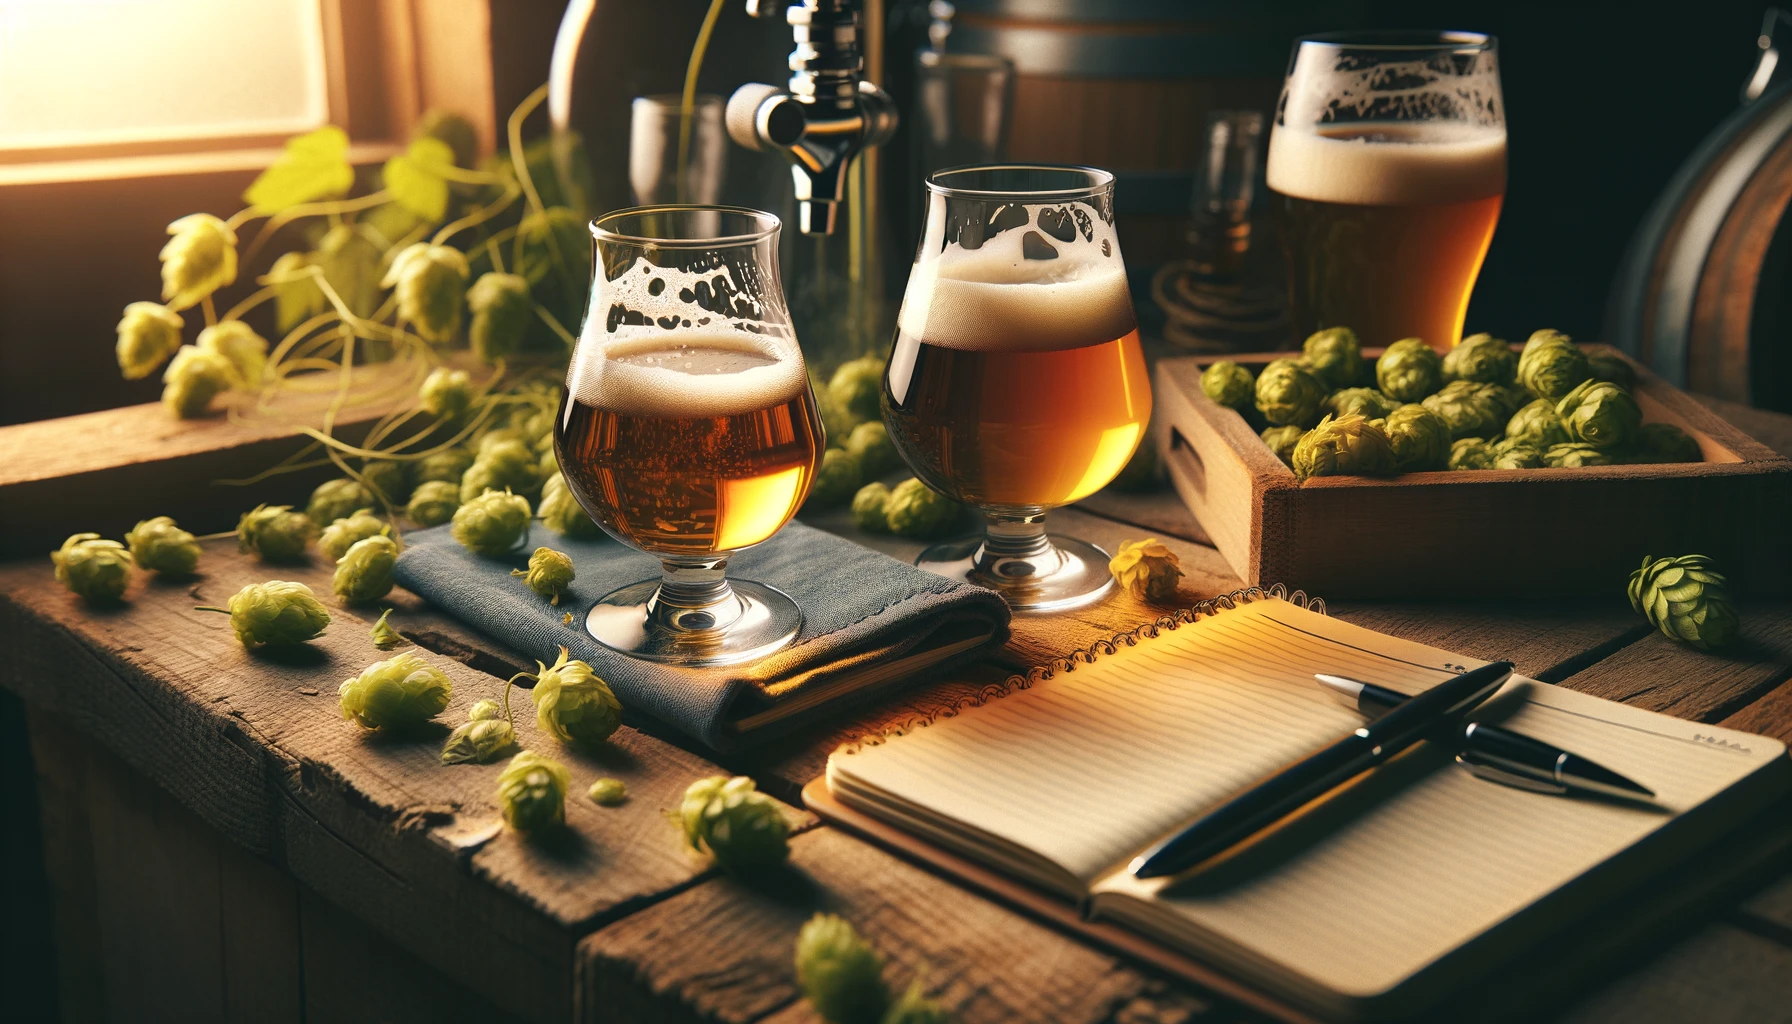 A brewer carefully examining a sample of hops with stainless steel fermentation tanks in the background. The focus is on the brewer's hands and the ho